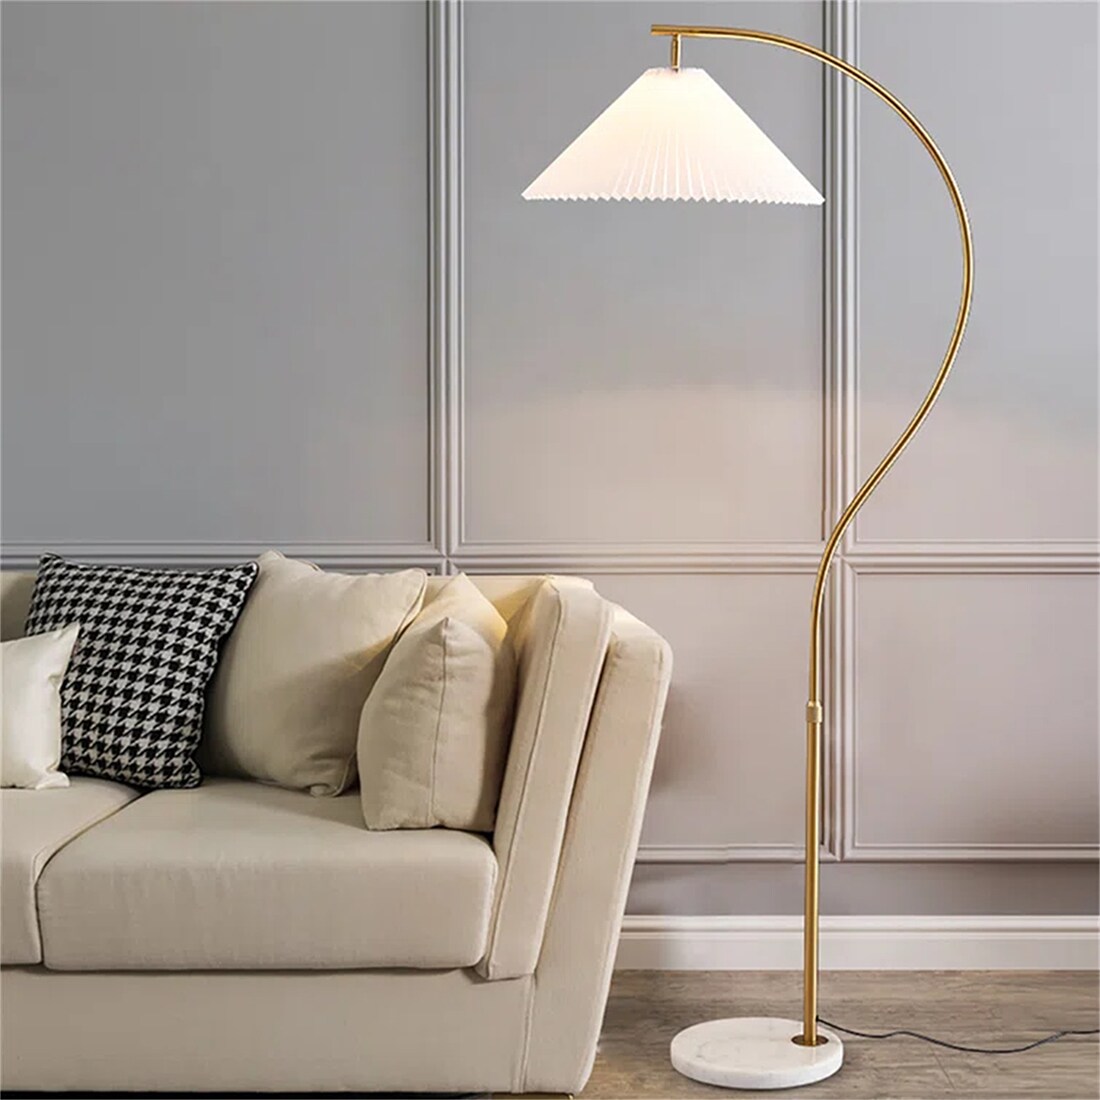 DEELIGHT With iron lamp pole, fabric drum lampshade and natural 